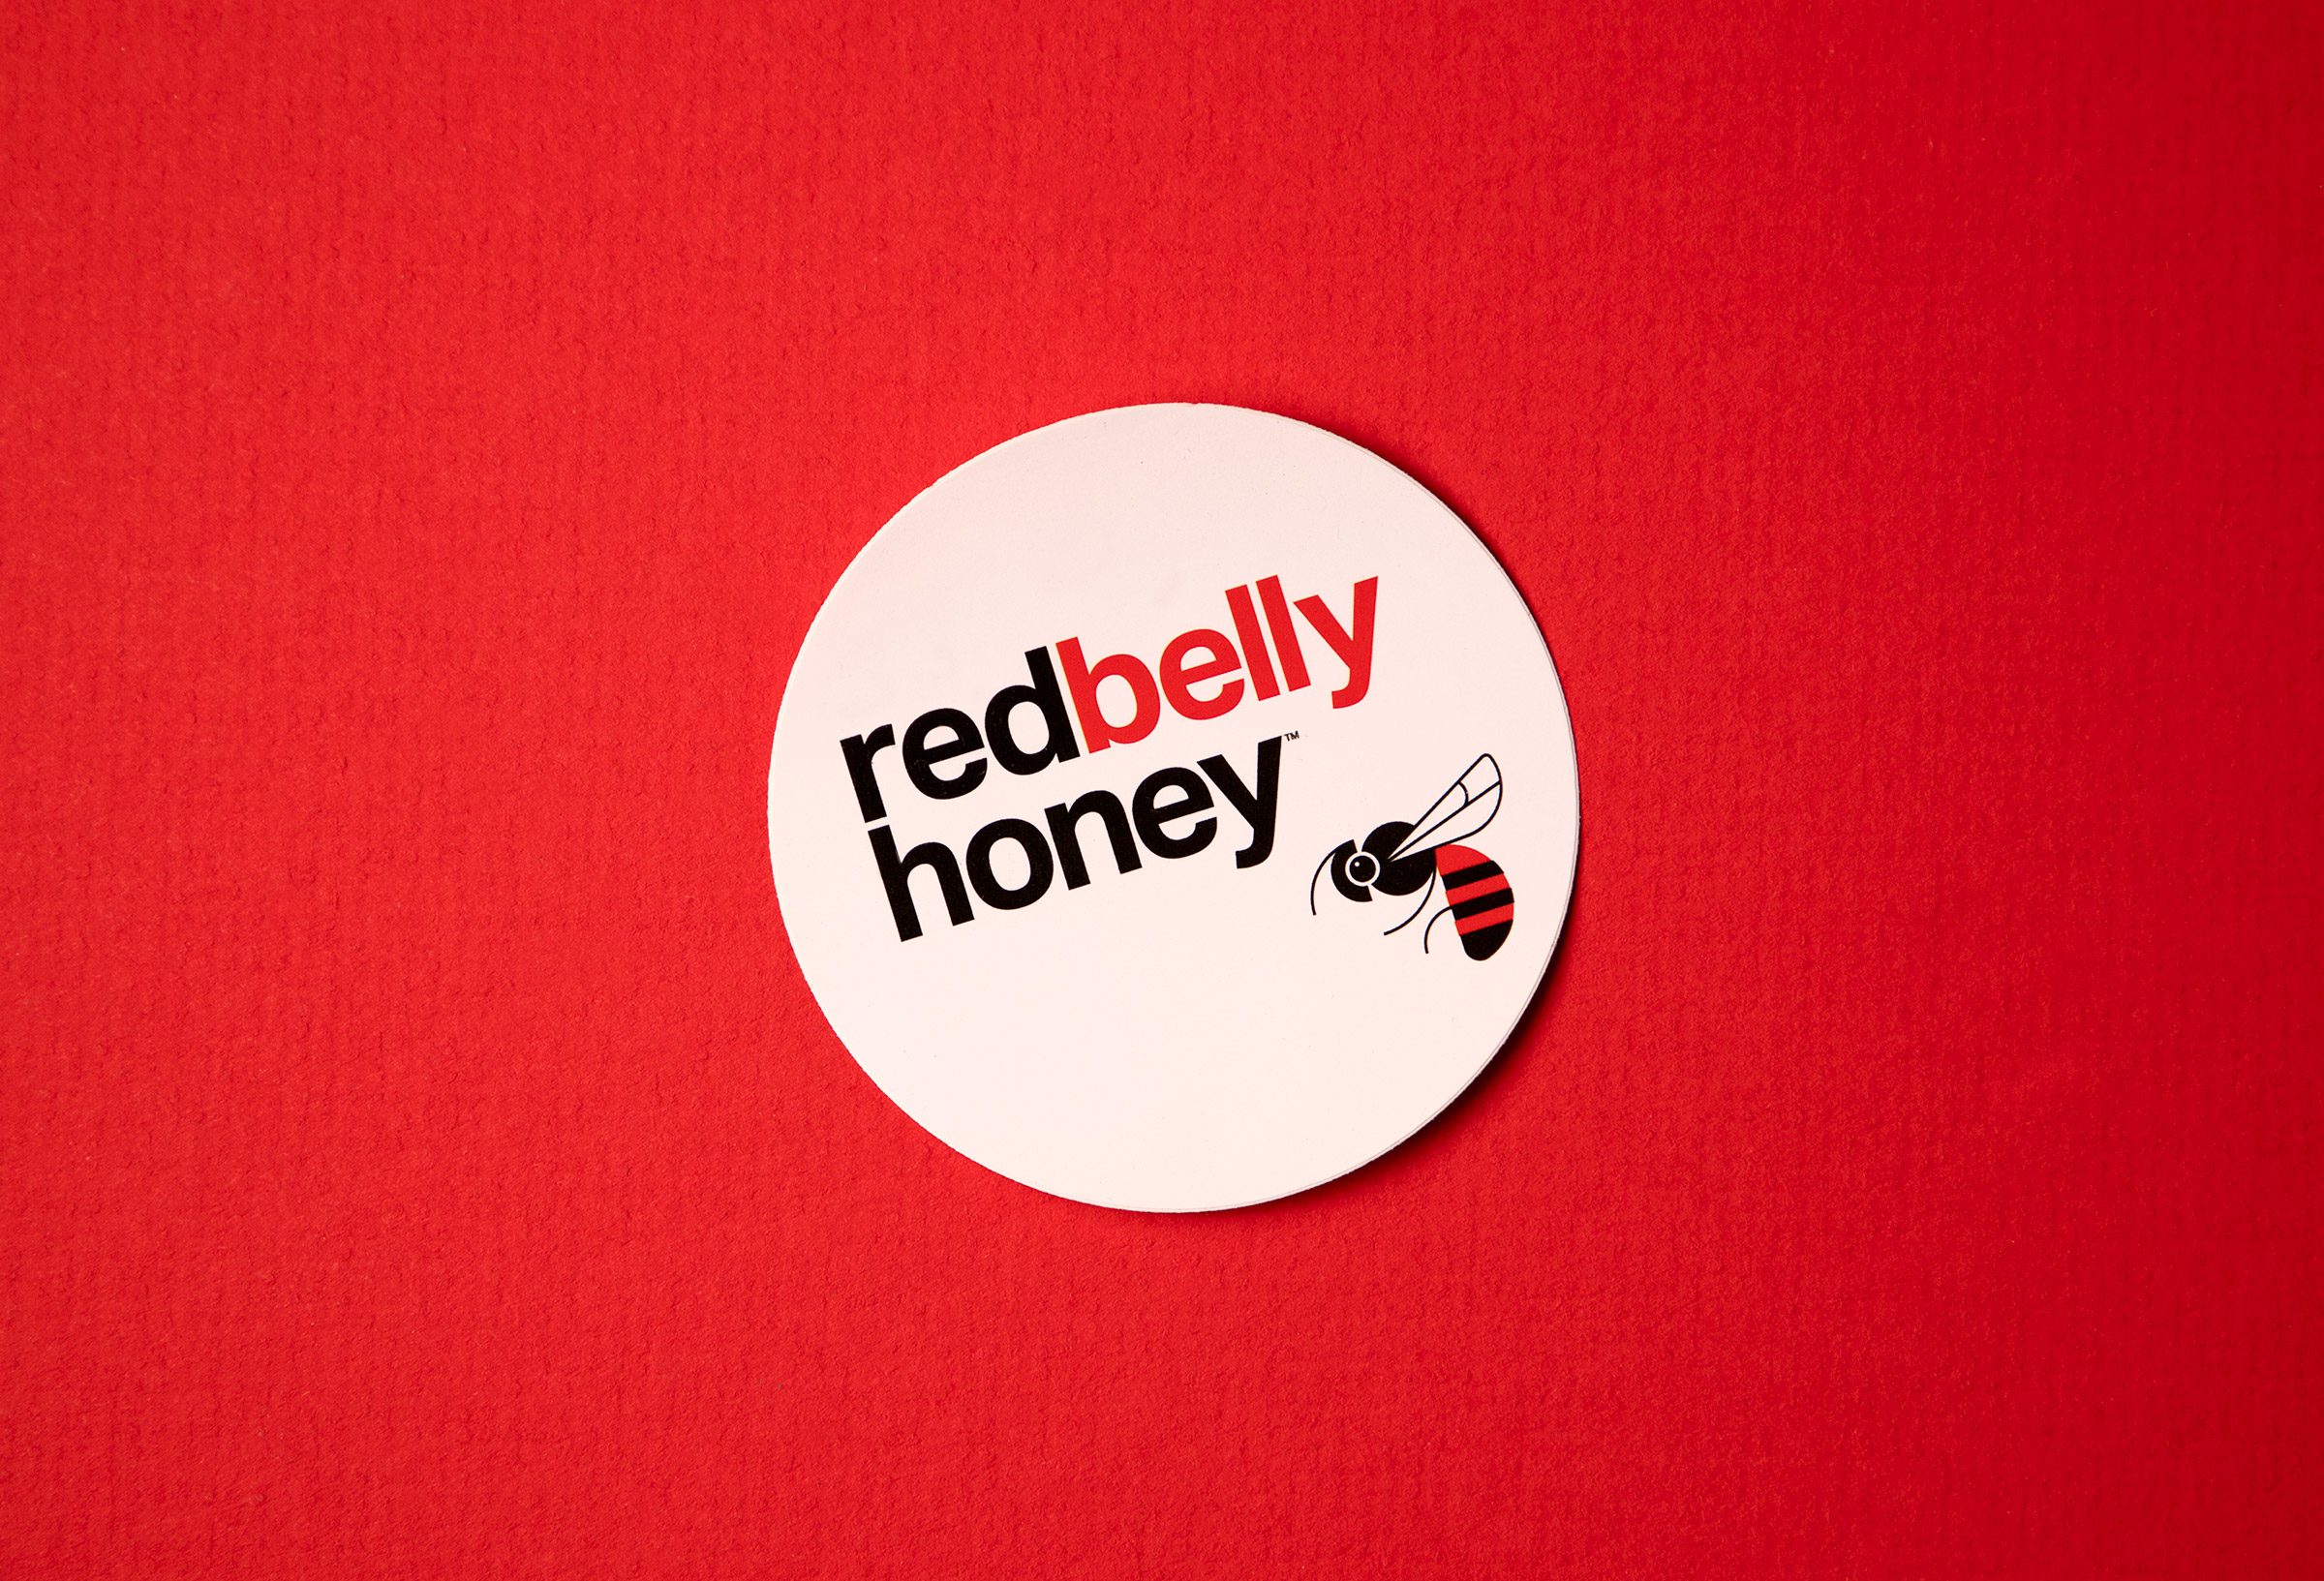 red belly honey stickers, round white on red